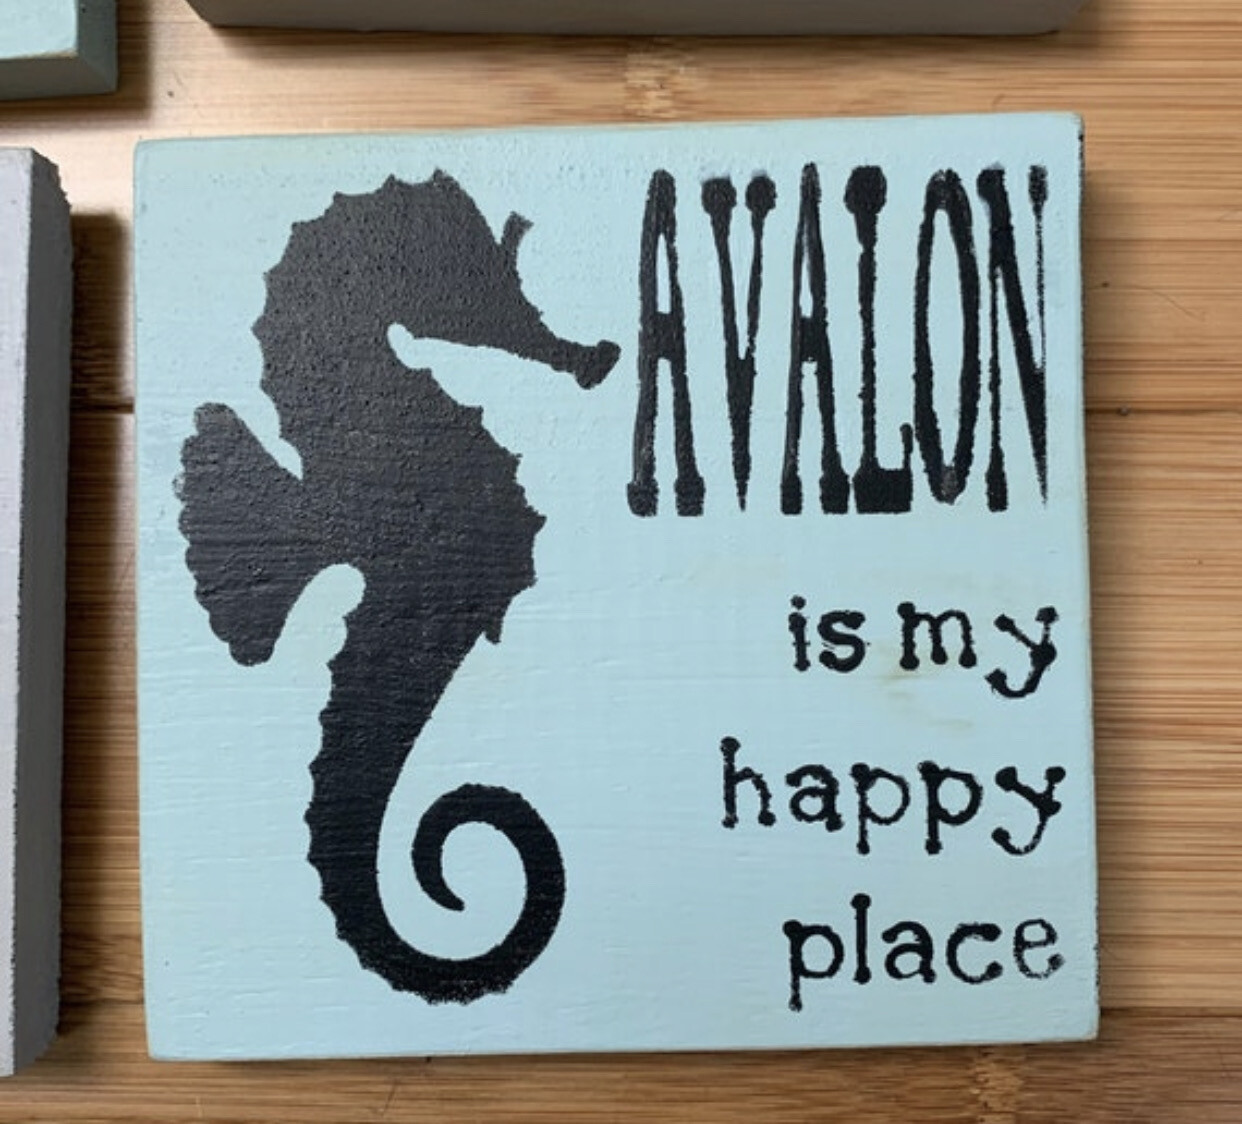 Rustic Wood Avalon NJ Sign - Avalon Is My Happy Place Sign